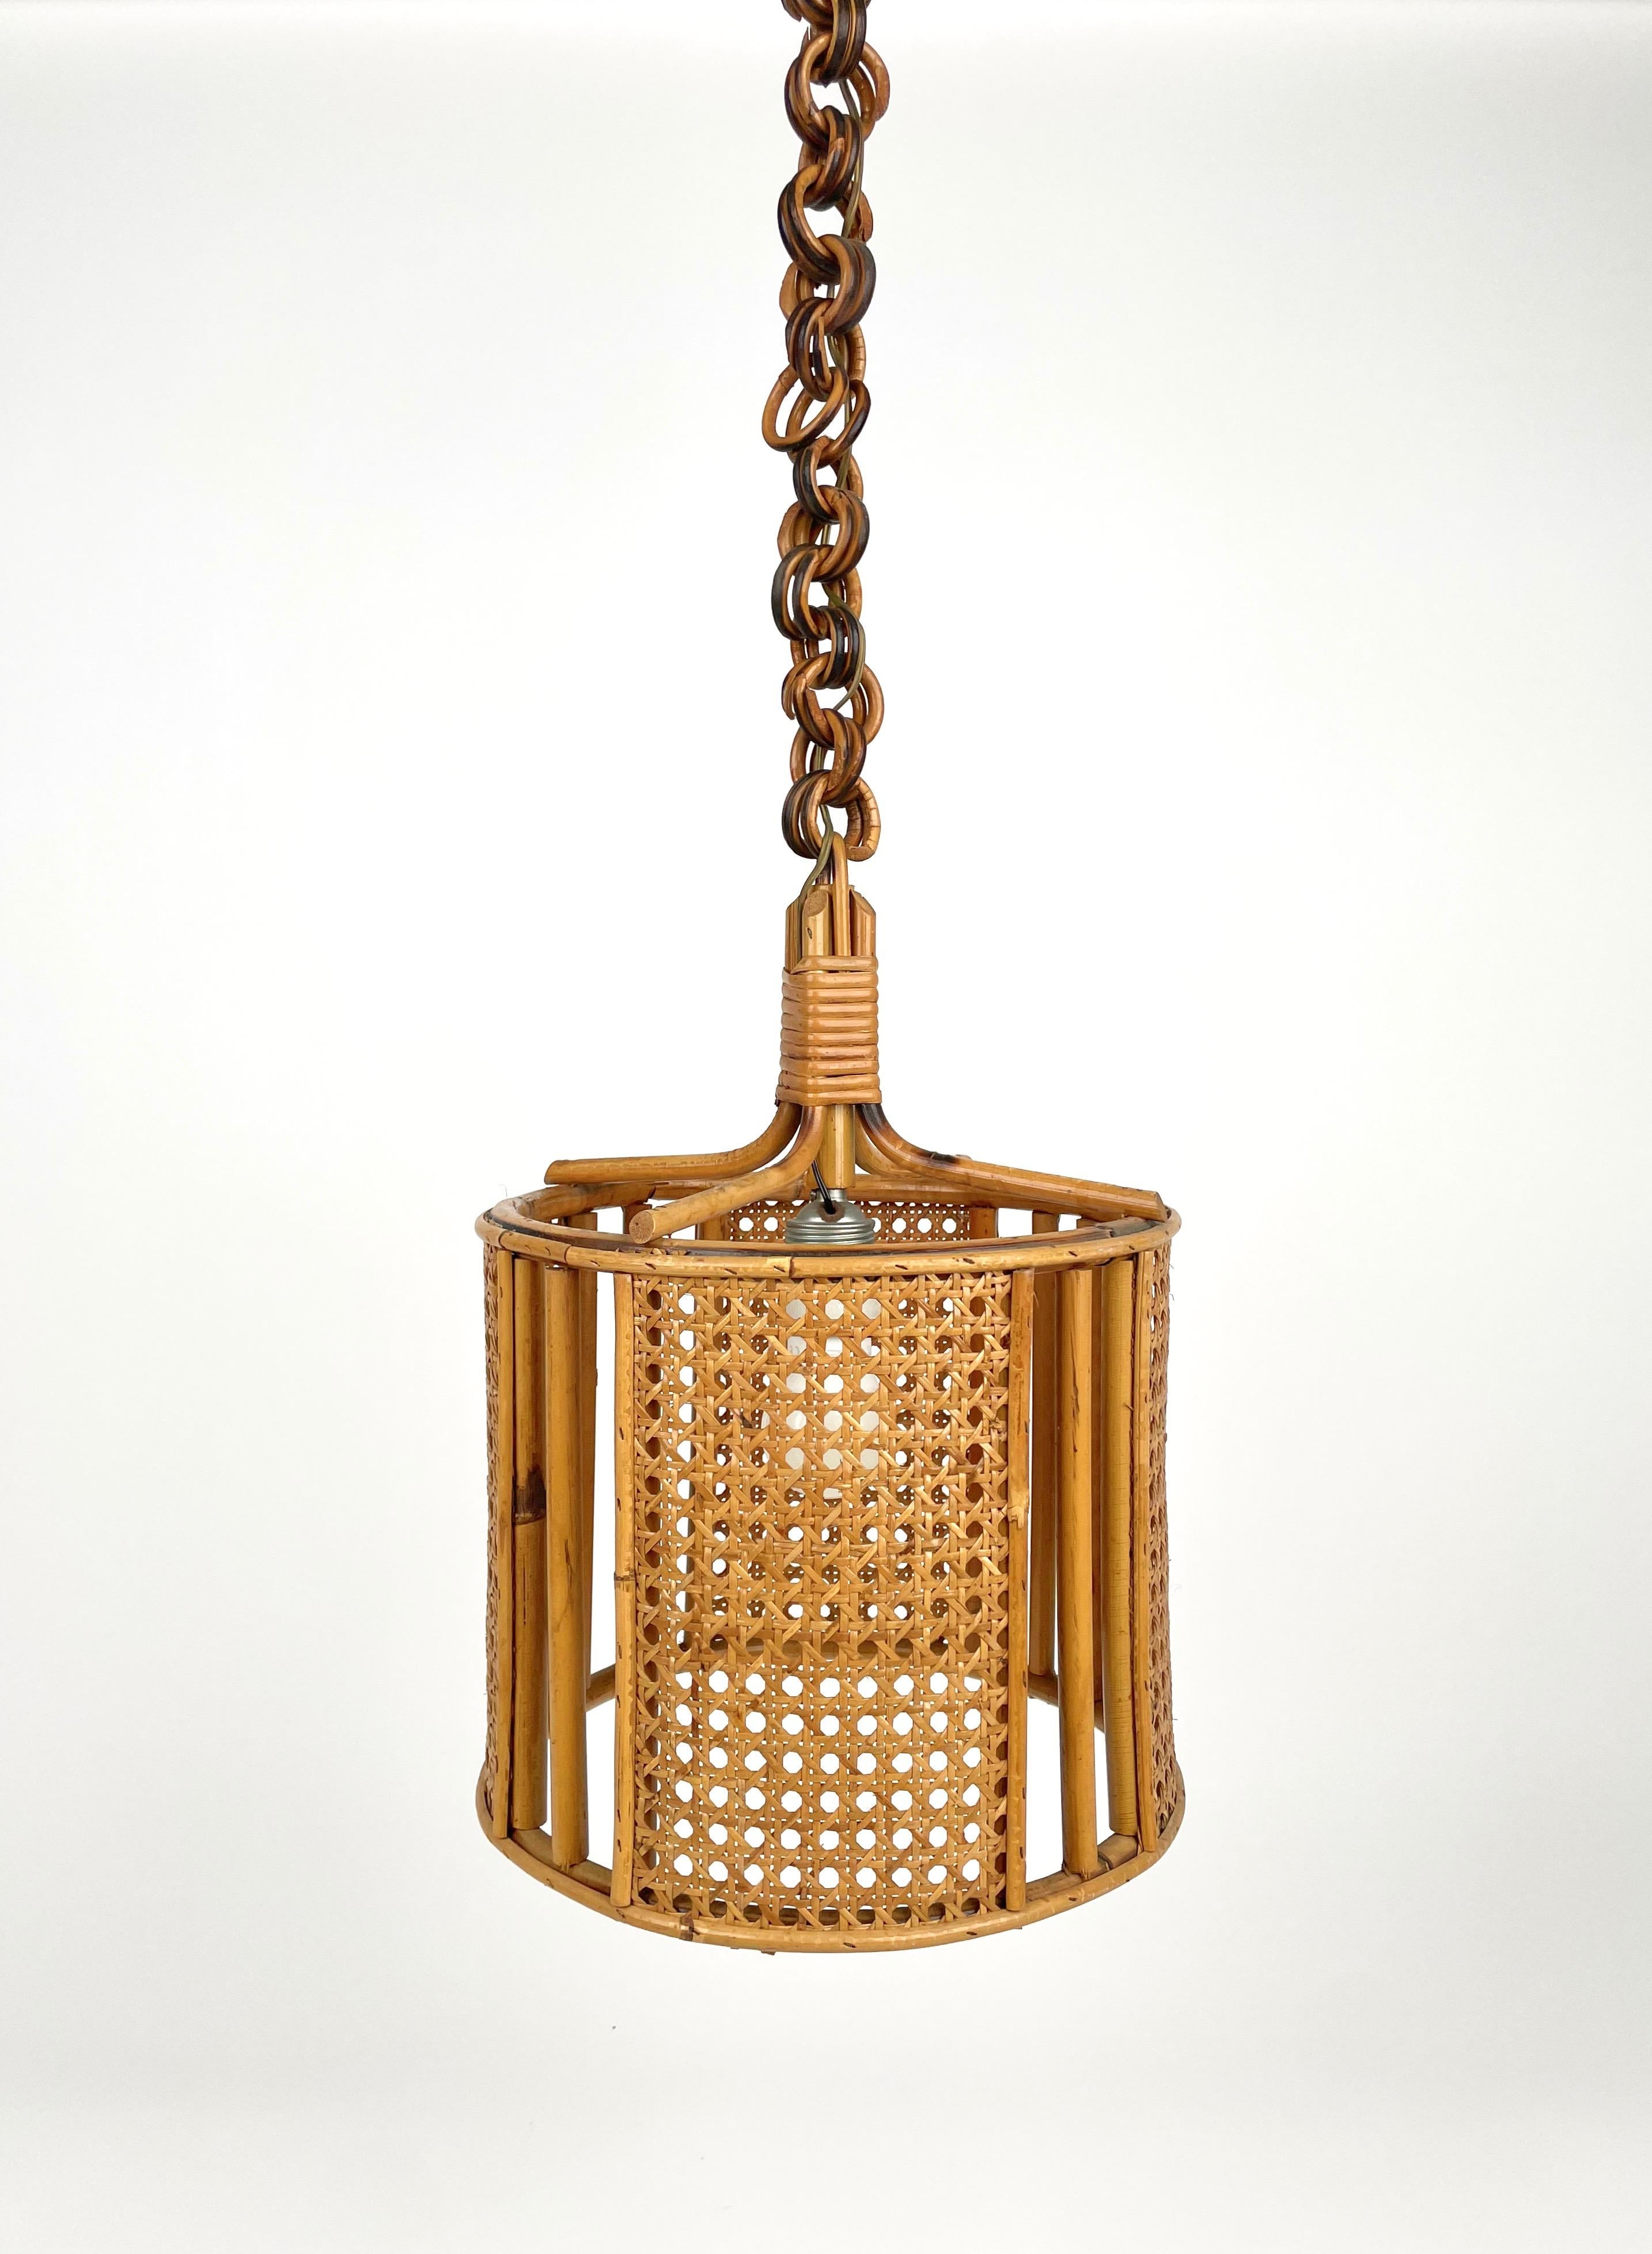 Midcentury French Riviera Rattan and Wicker Pendent, Italy 1960s In Good Condition For Sale In Rome, IT